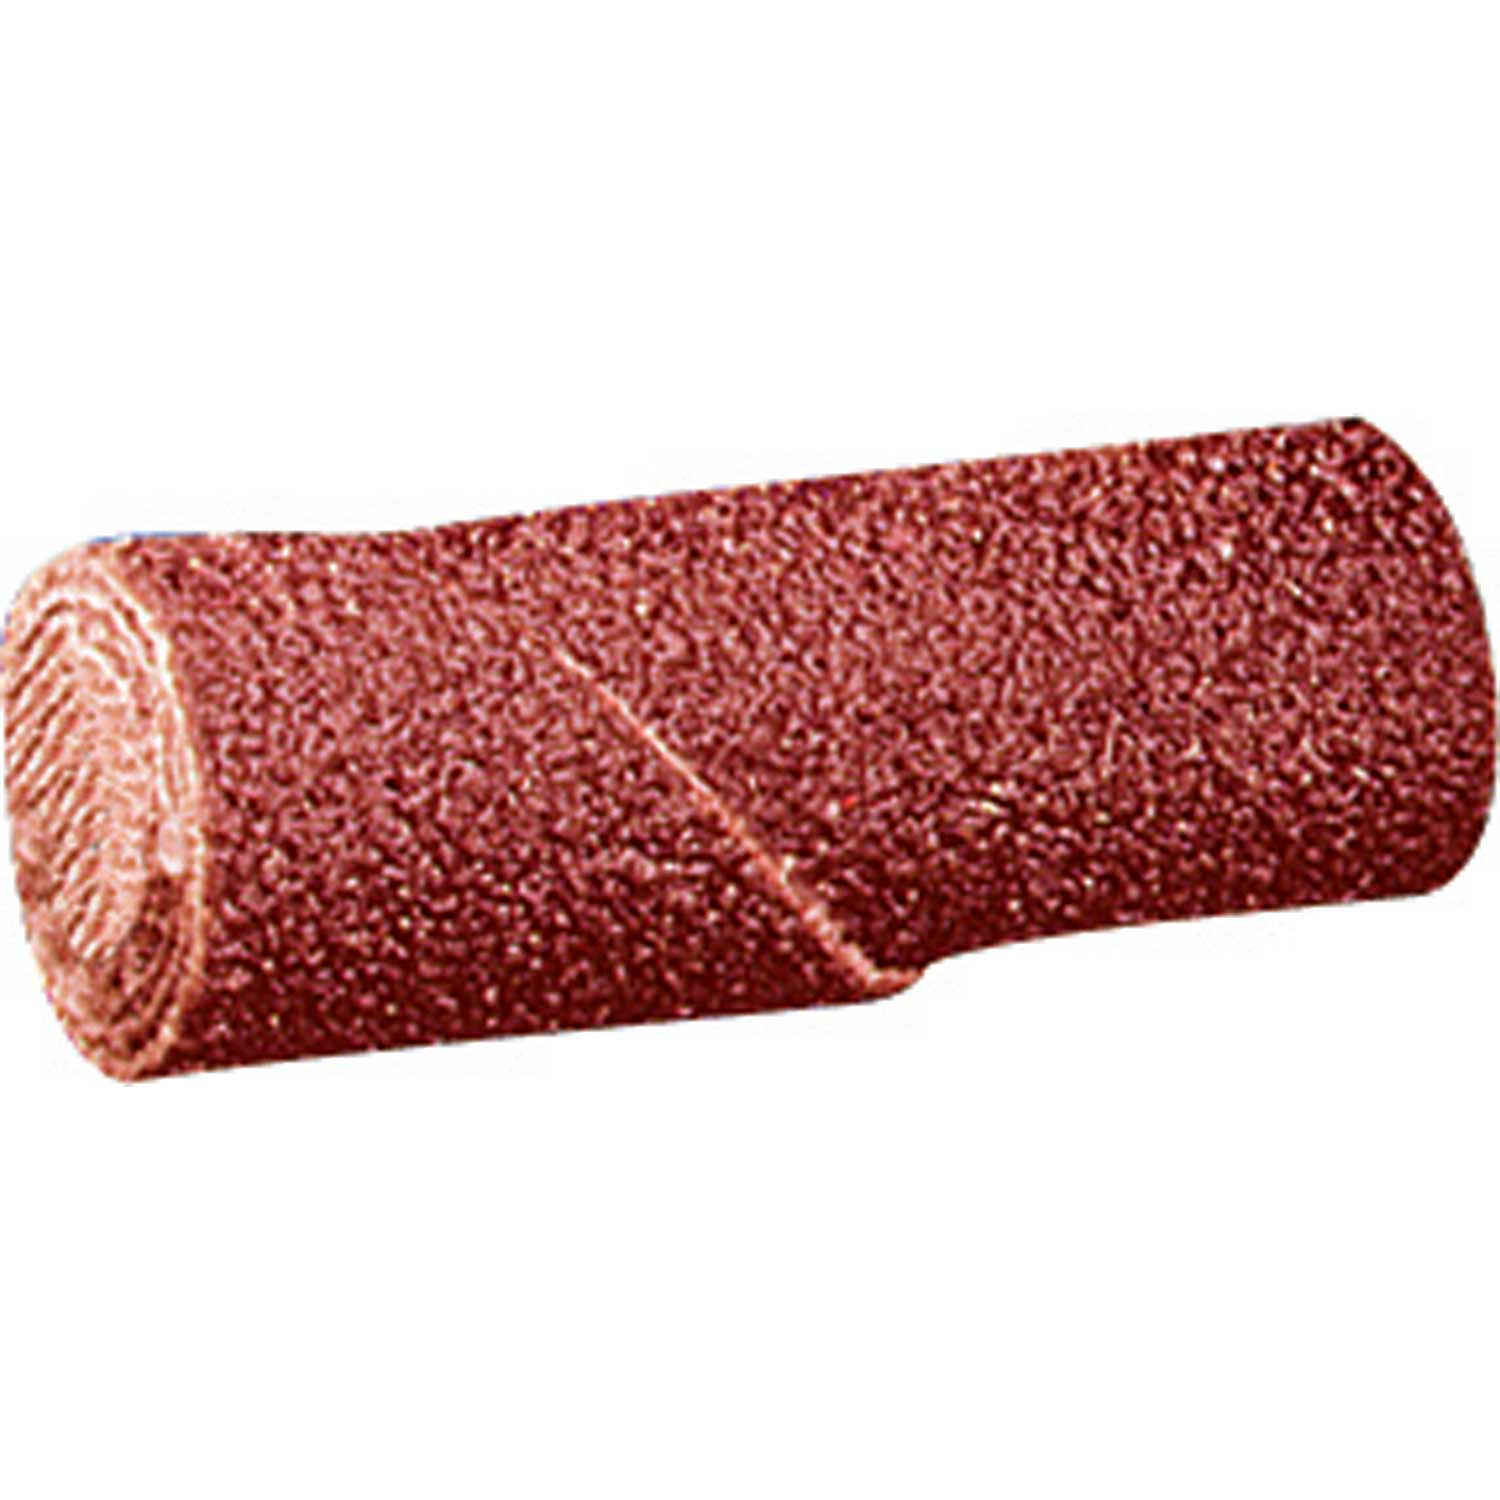 United Abrasives Sait 38093 Straight Cartridge Roll 5//8 x 1-1//2 x 1//8 60 Grit Aluminum Oxide Sold in packages of 100 Pkg Qty 100,